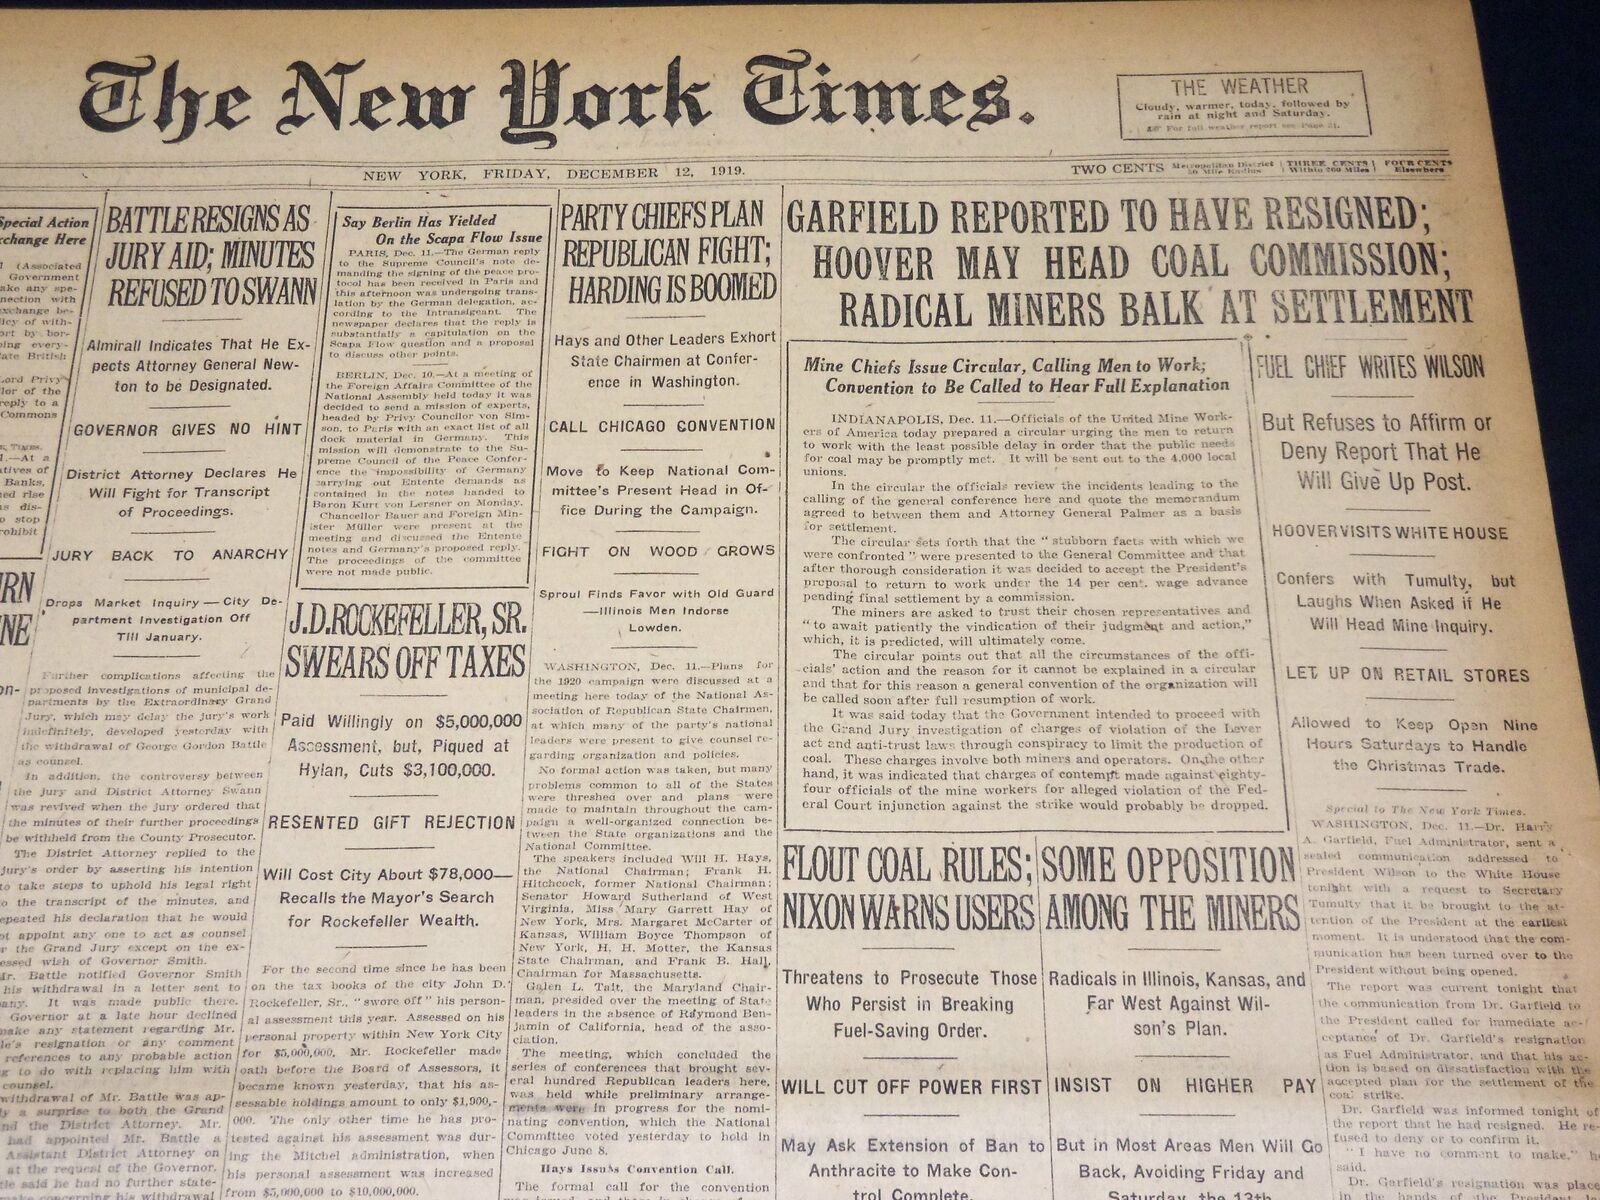 1919 DECEMBER 12 NEW YORK TIMES - HOOVER MAY HEAD COAL COMMISSION - NT 7953